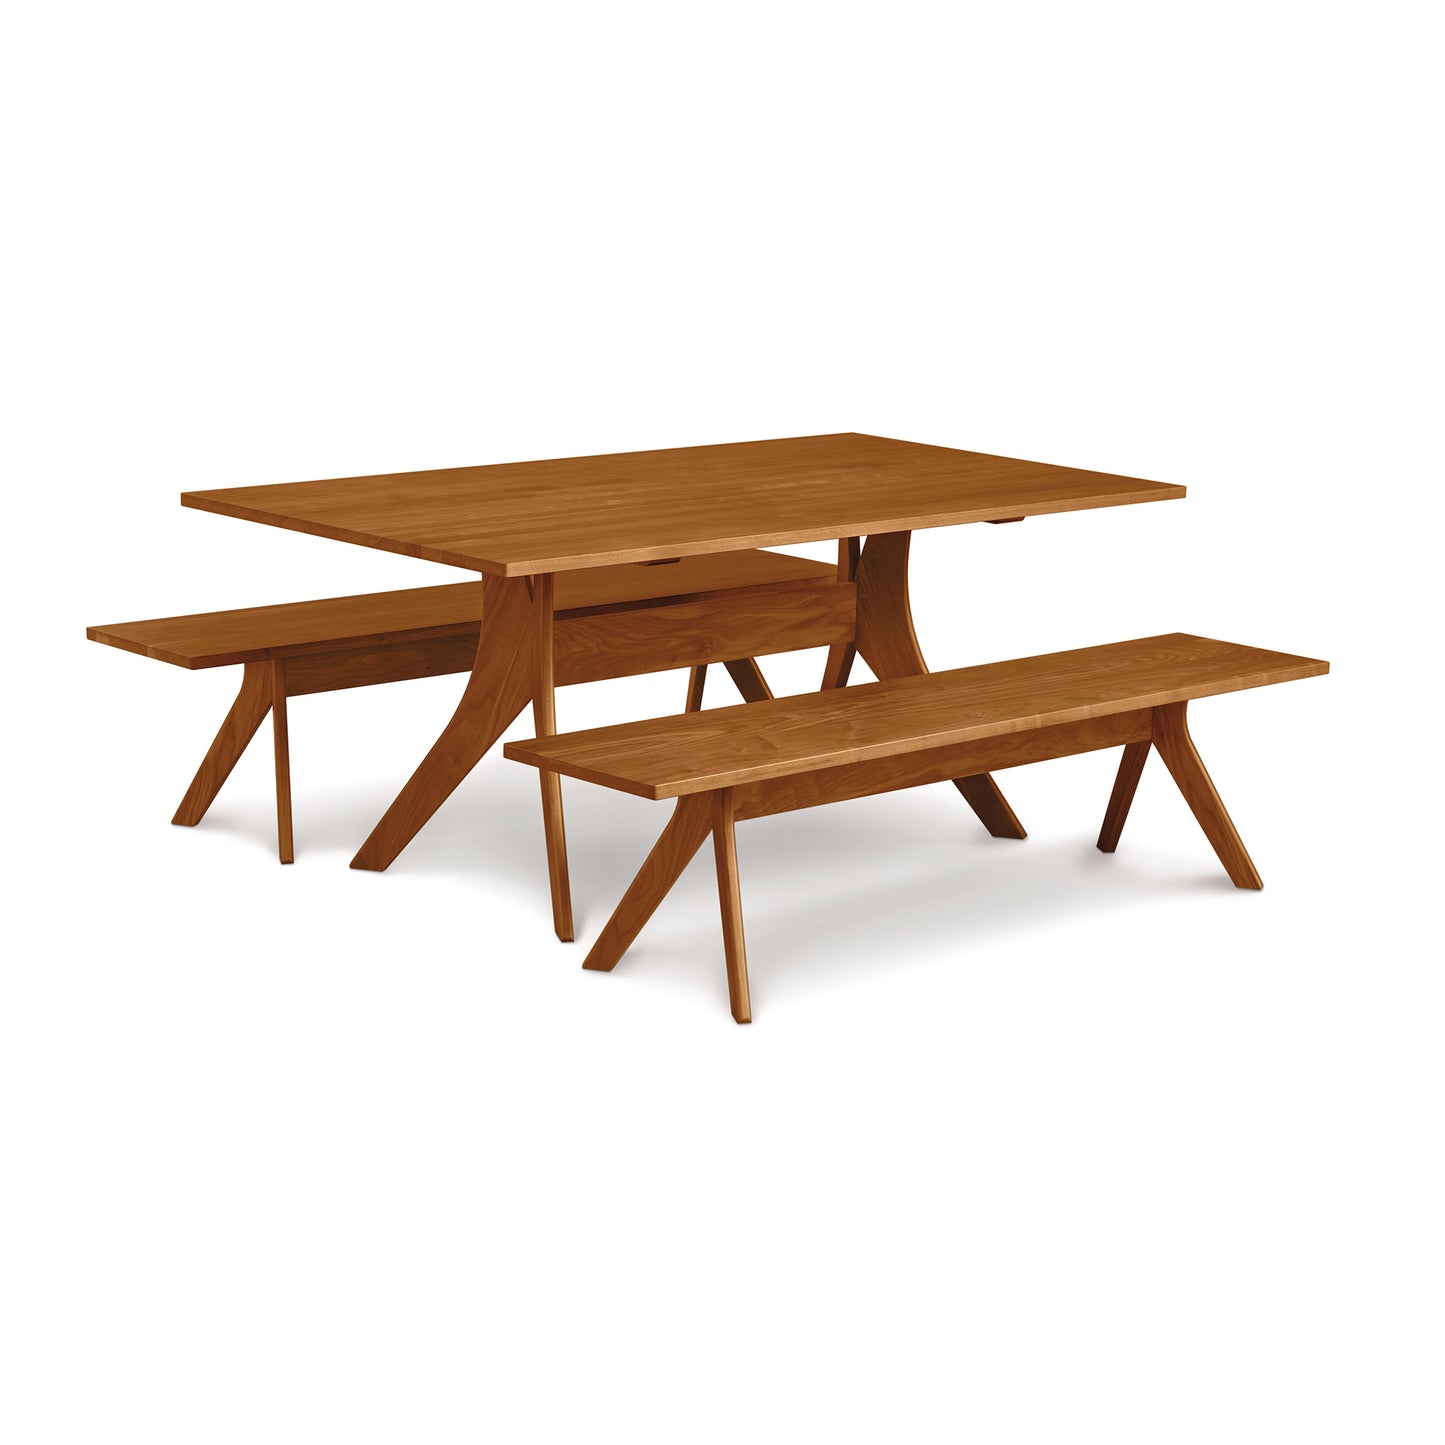 An Audrey Solid Top Dining Table crafted from solid hardwood, complete with two matching benches, created by Copeland Furniture.